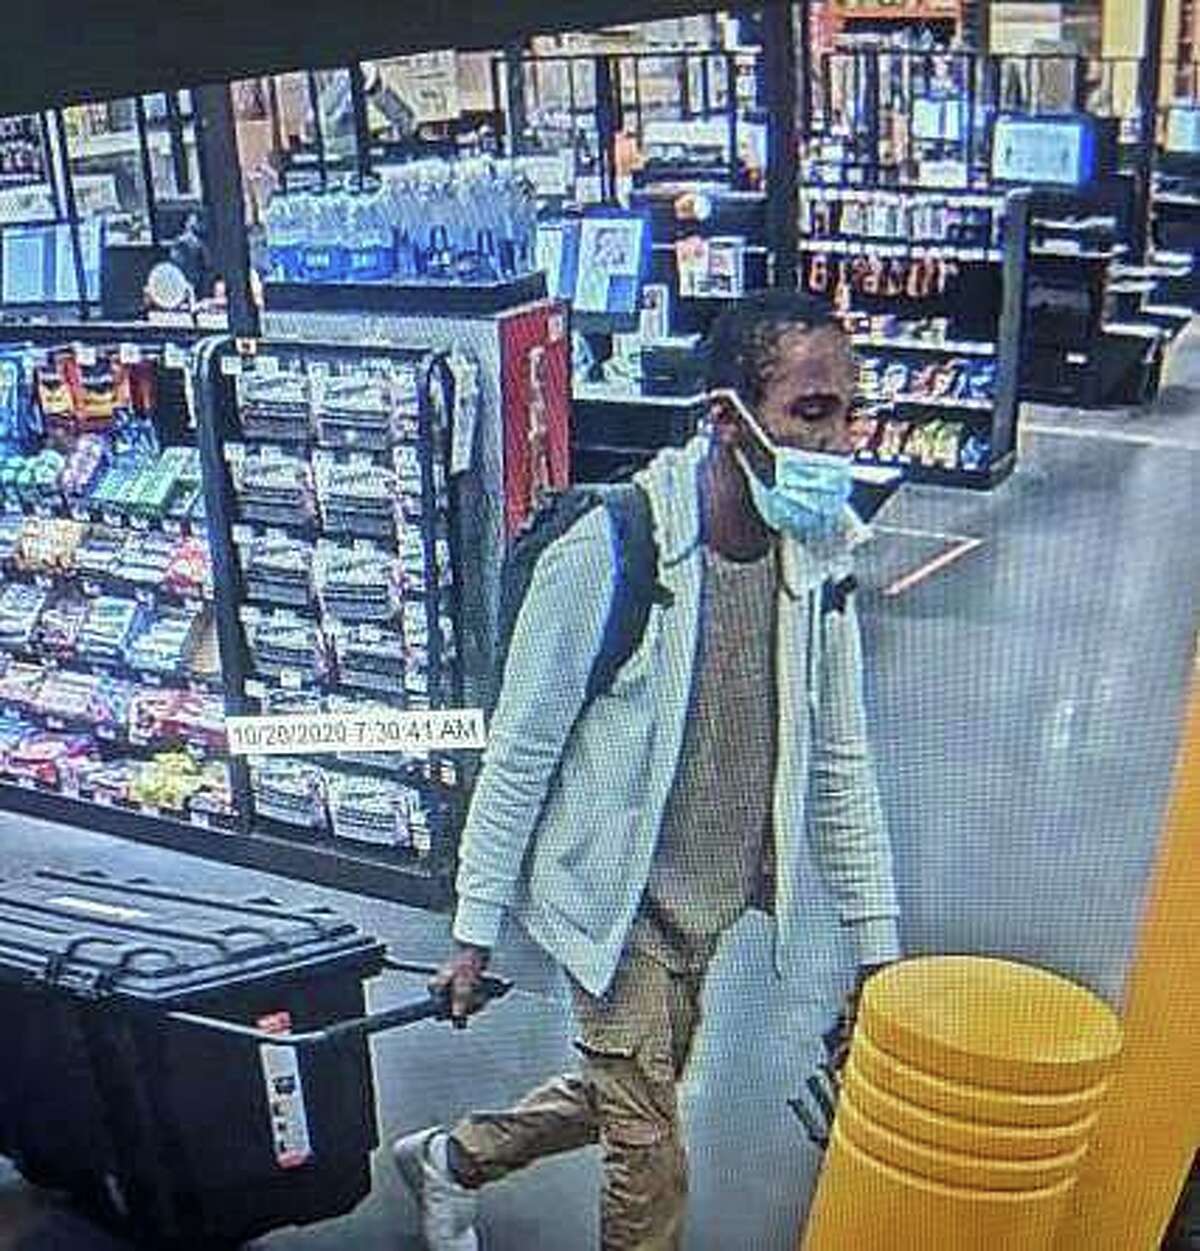 Police are asking the public’s help to identify a suspect in a recent larceny at the Home Depot. Police say the theft happened on Tuesday, Oct. 20, 2020.